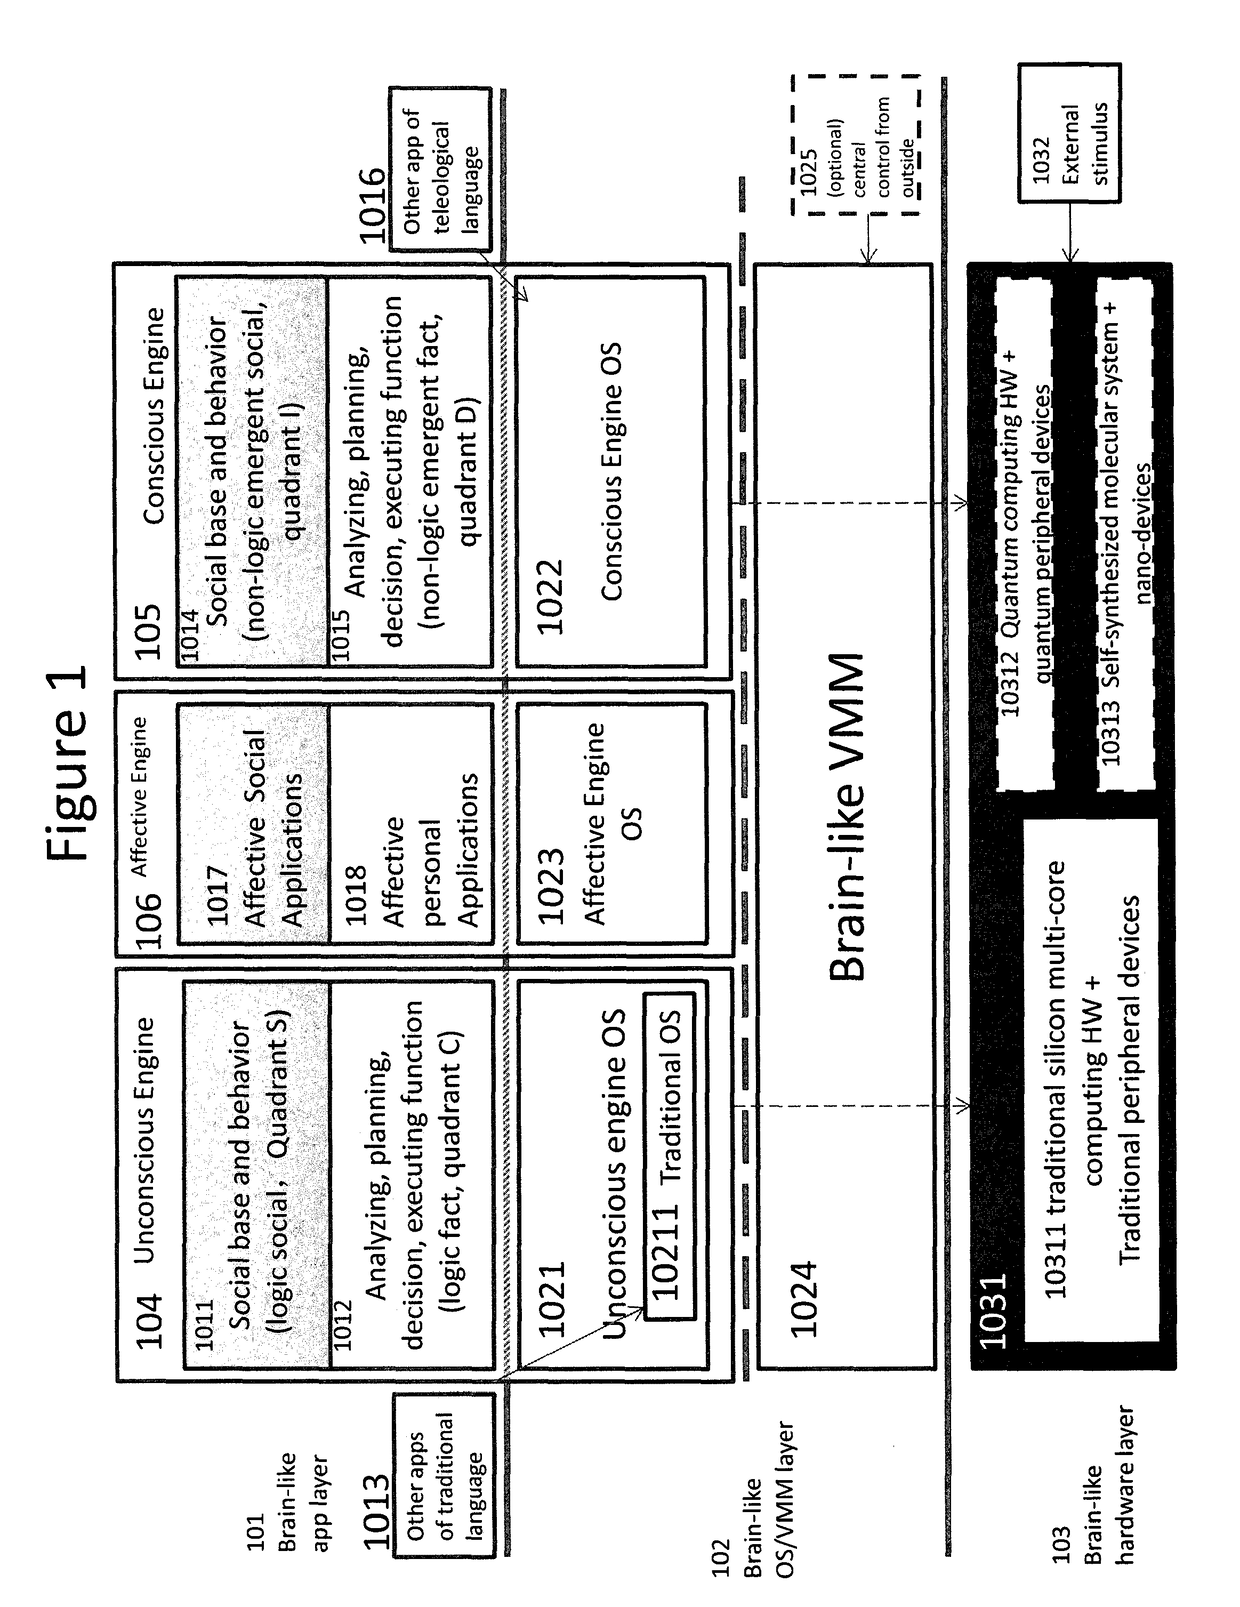 Method for virtualization of a brain-like computing system